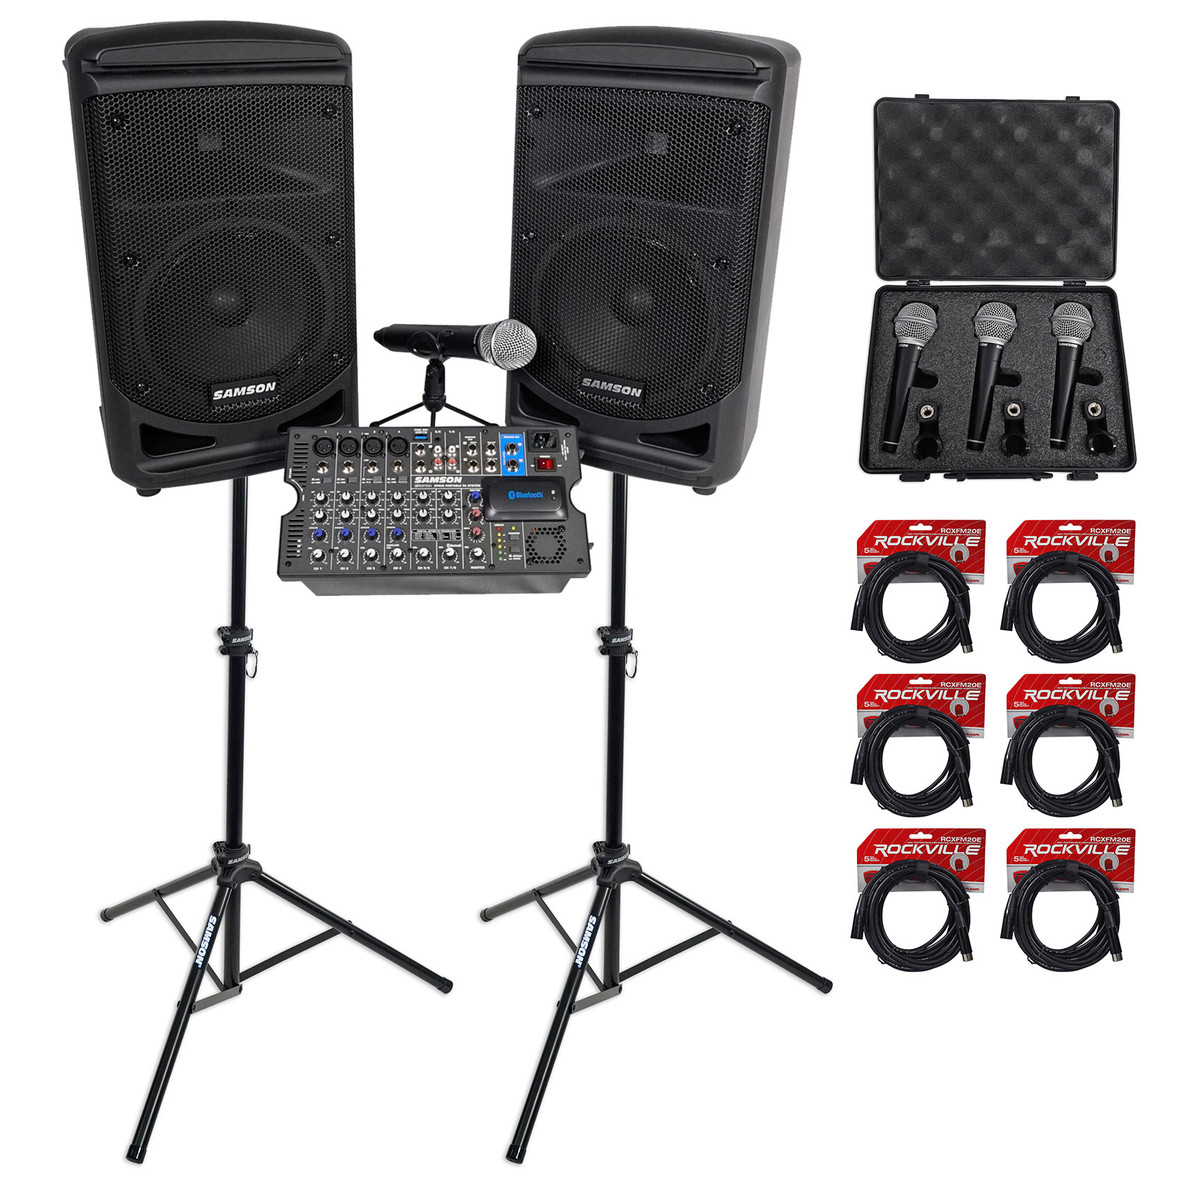 Samson Expedition XP800 Portable PA System with Bluetooth, Karaoke